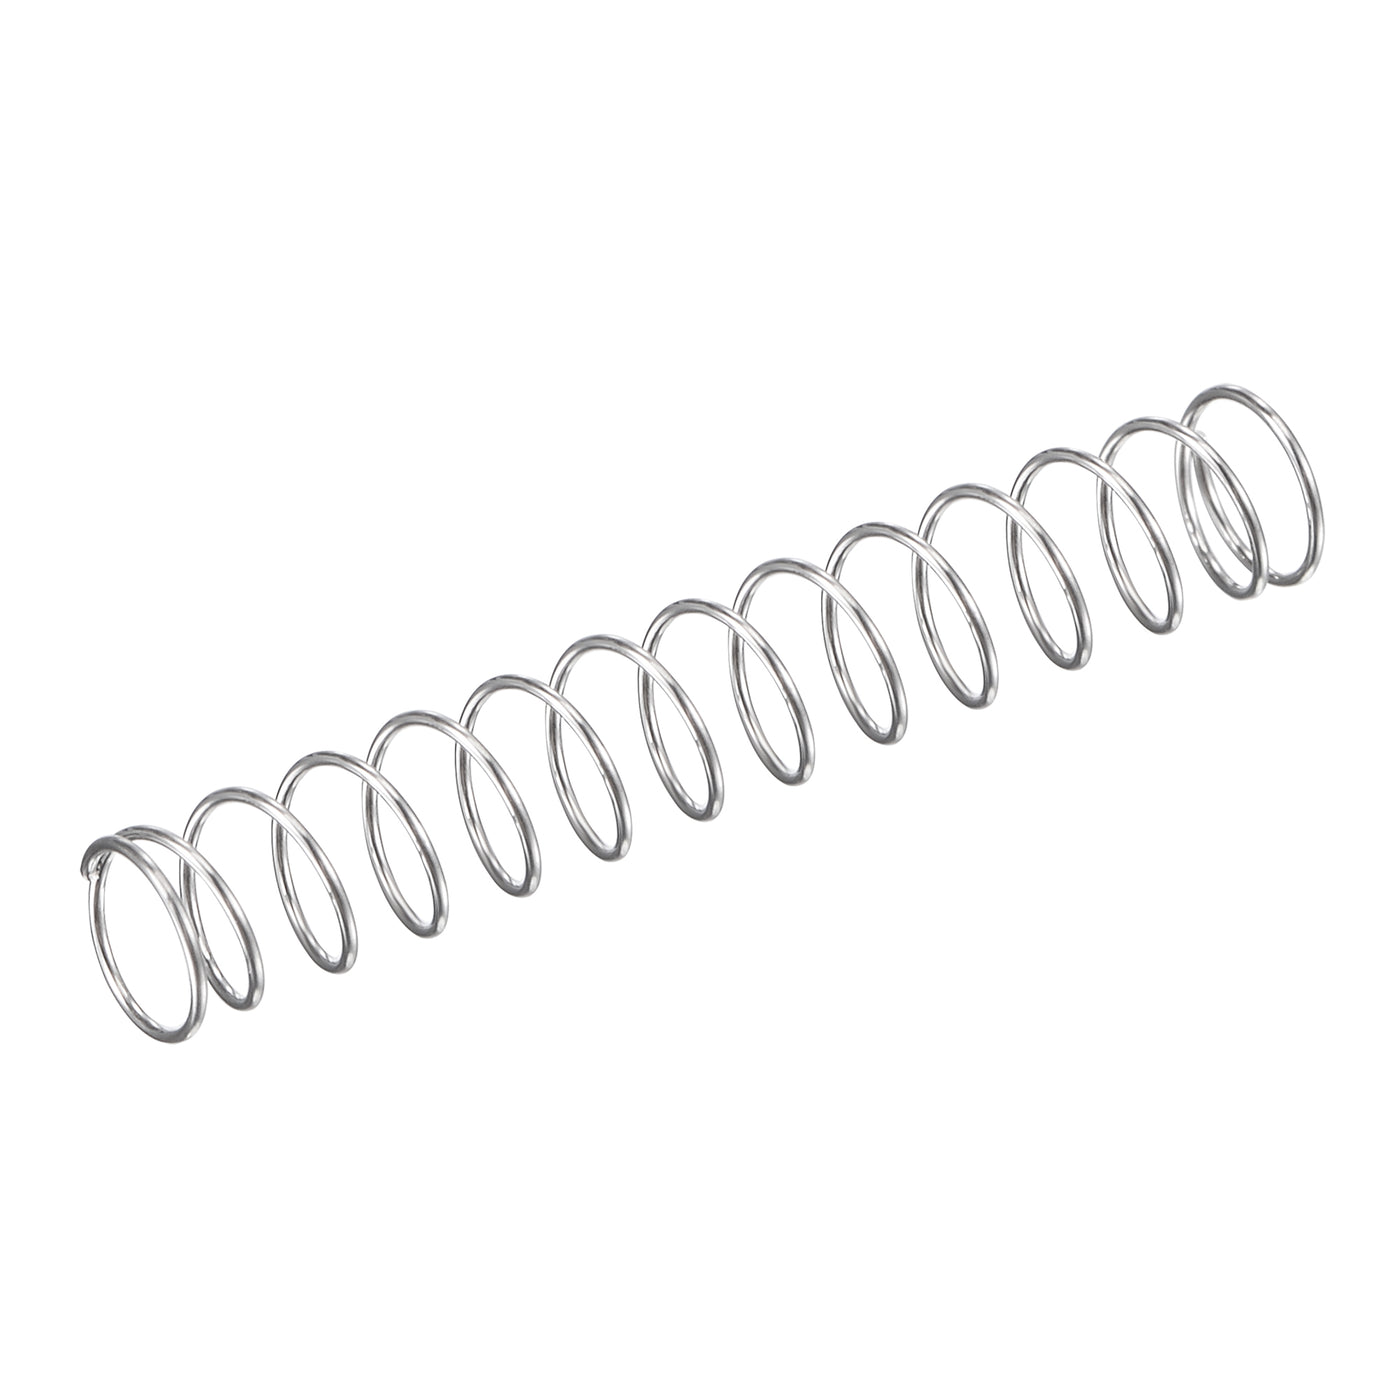 uxcell Uxcell 5mmx0.4mmx30mm 304 Stainless Steel Compression Spring 2N Load Capacity 30pcs